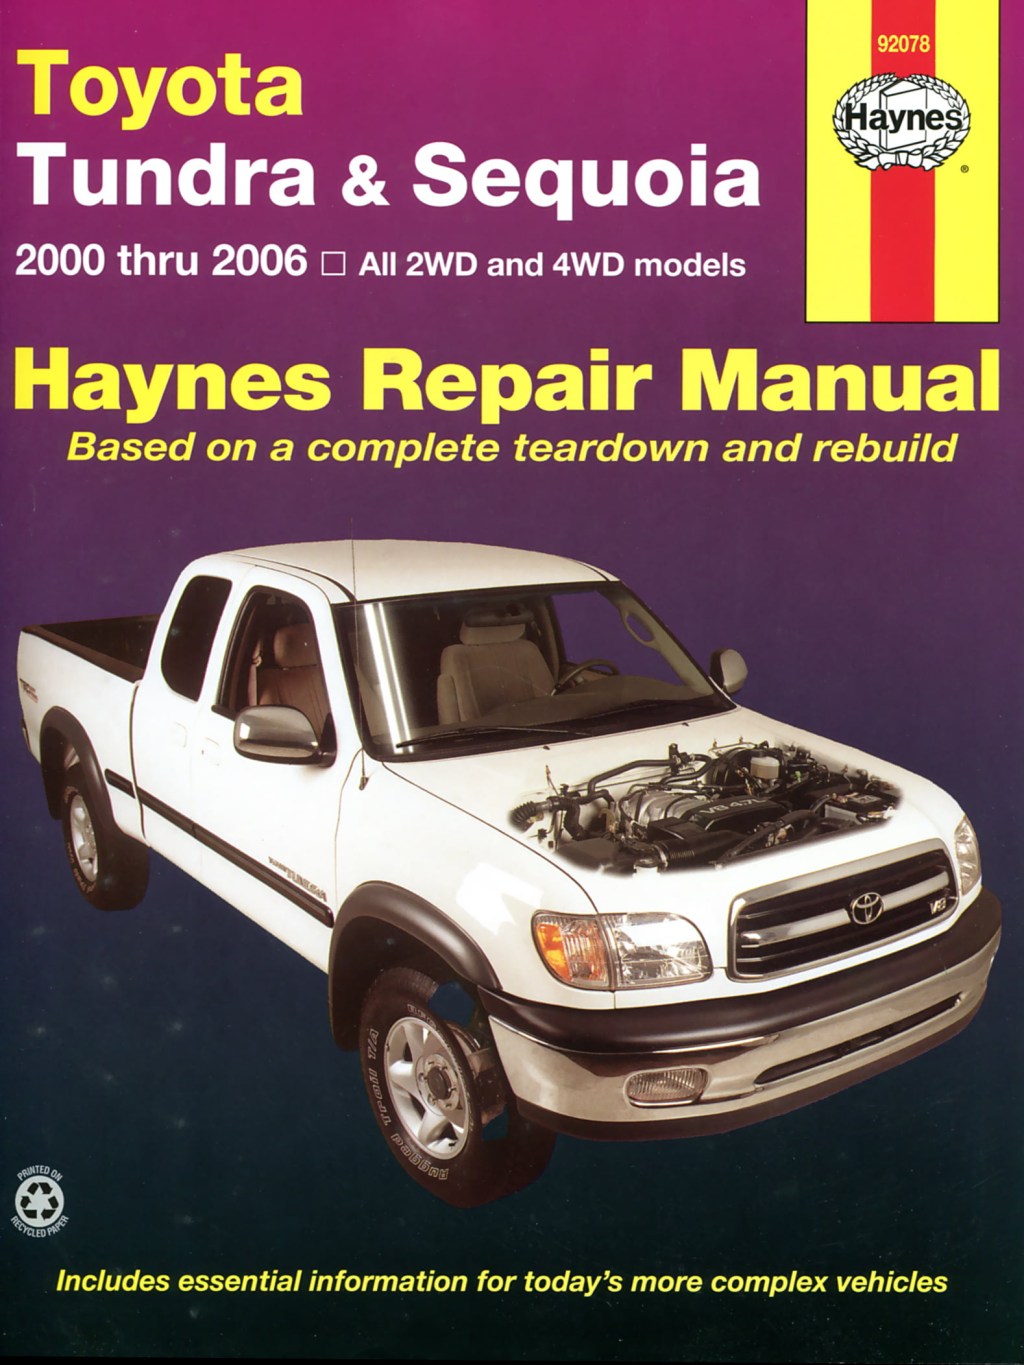 Picture of: Toyota Tundra WD & WD (-) & Sequoia (-) Haynes Repair Manual ^